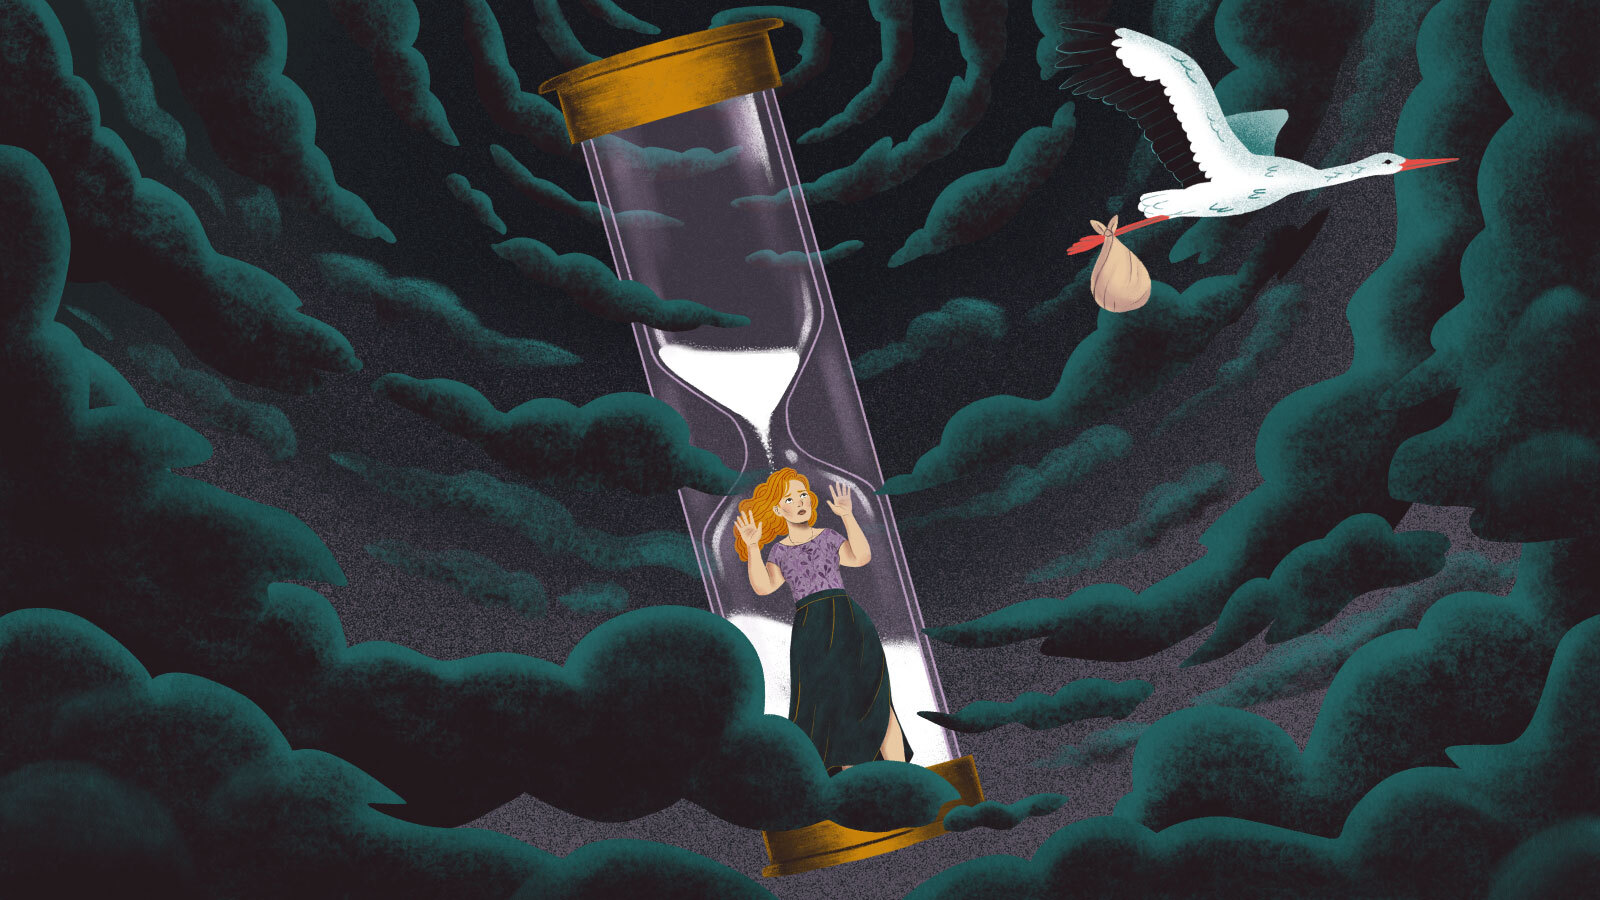 An illustration of a woman in an hourglass looking outside at a stork carrying a bundle. Around them, a hurricane swirls.